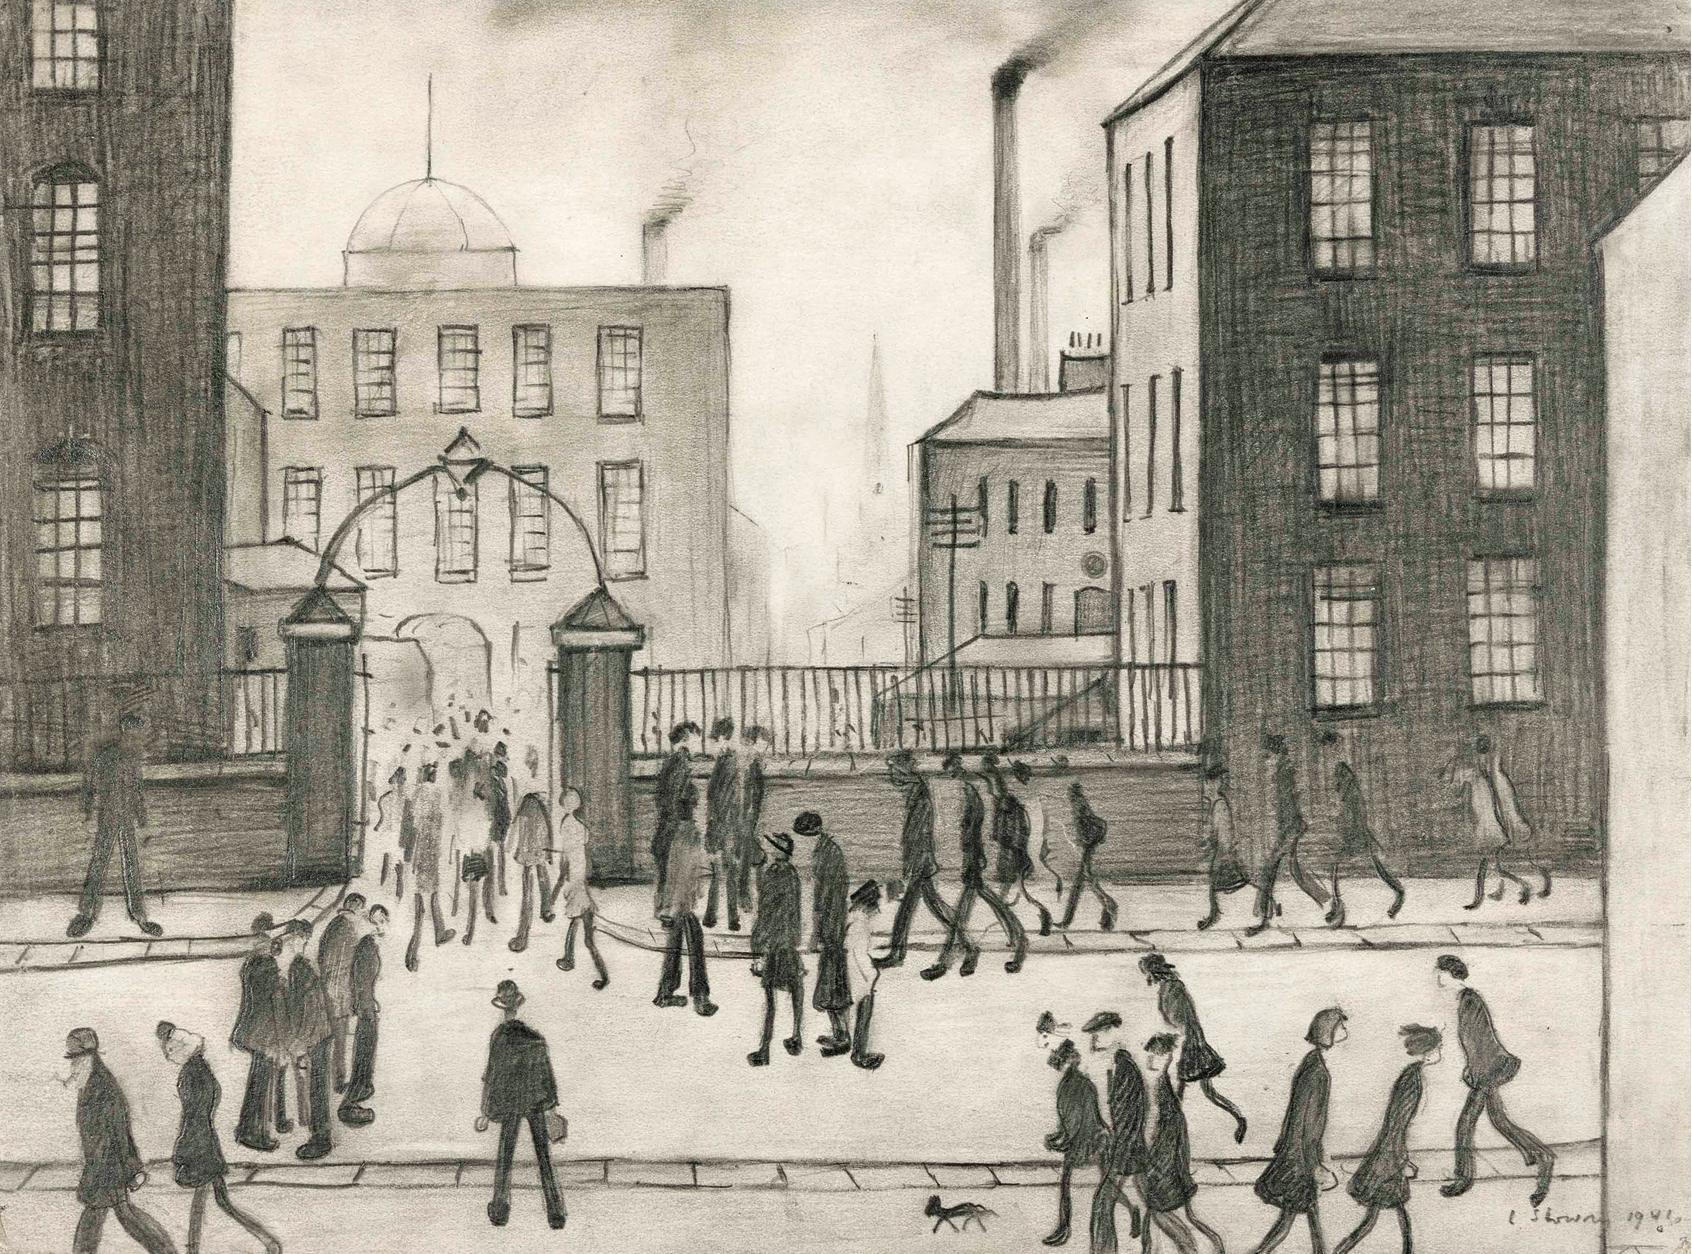 The mill gates (1941) by Laurence Stephen Lowry (1887 - 1976), English artist.